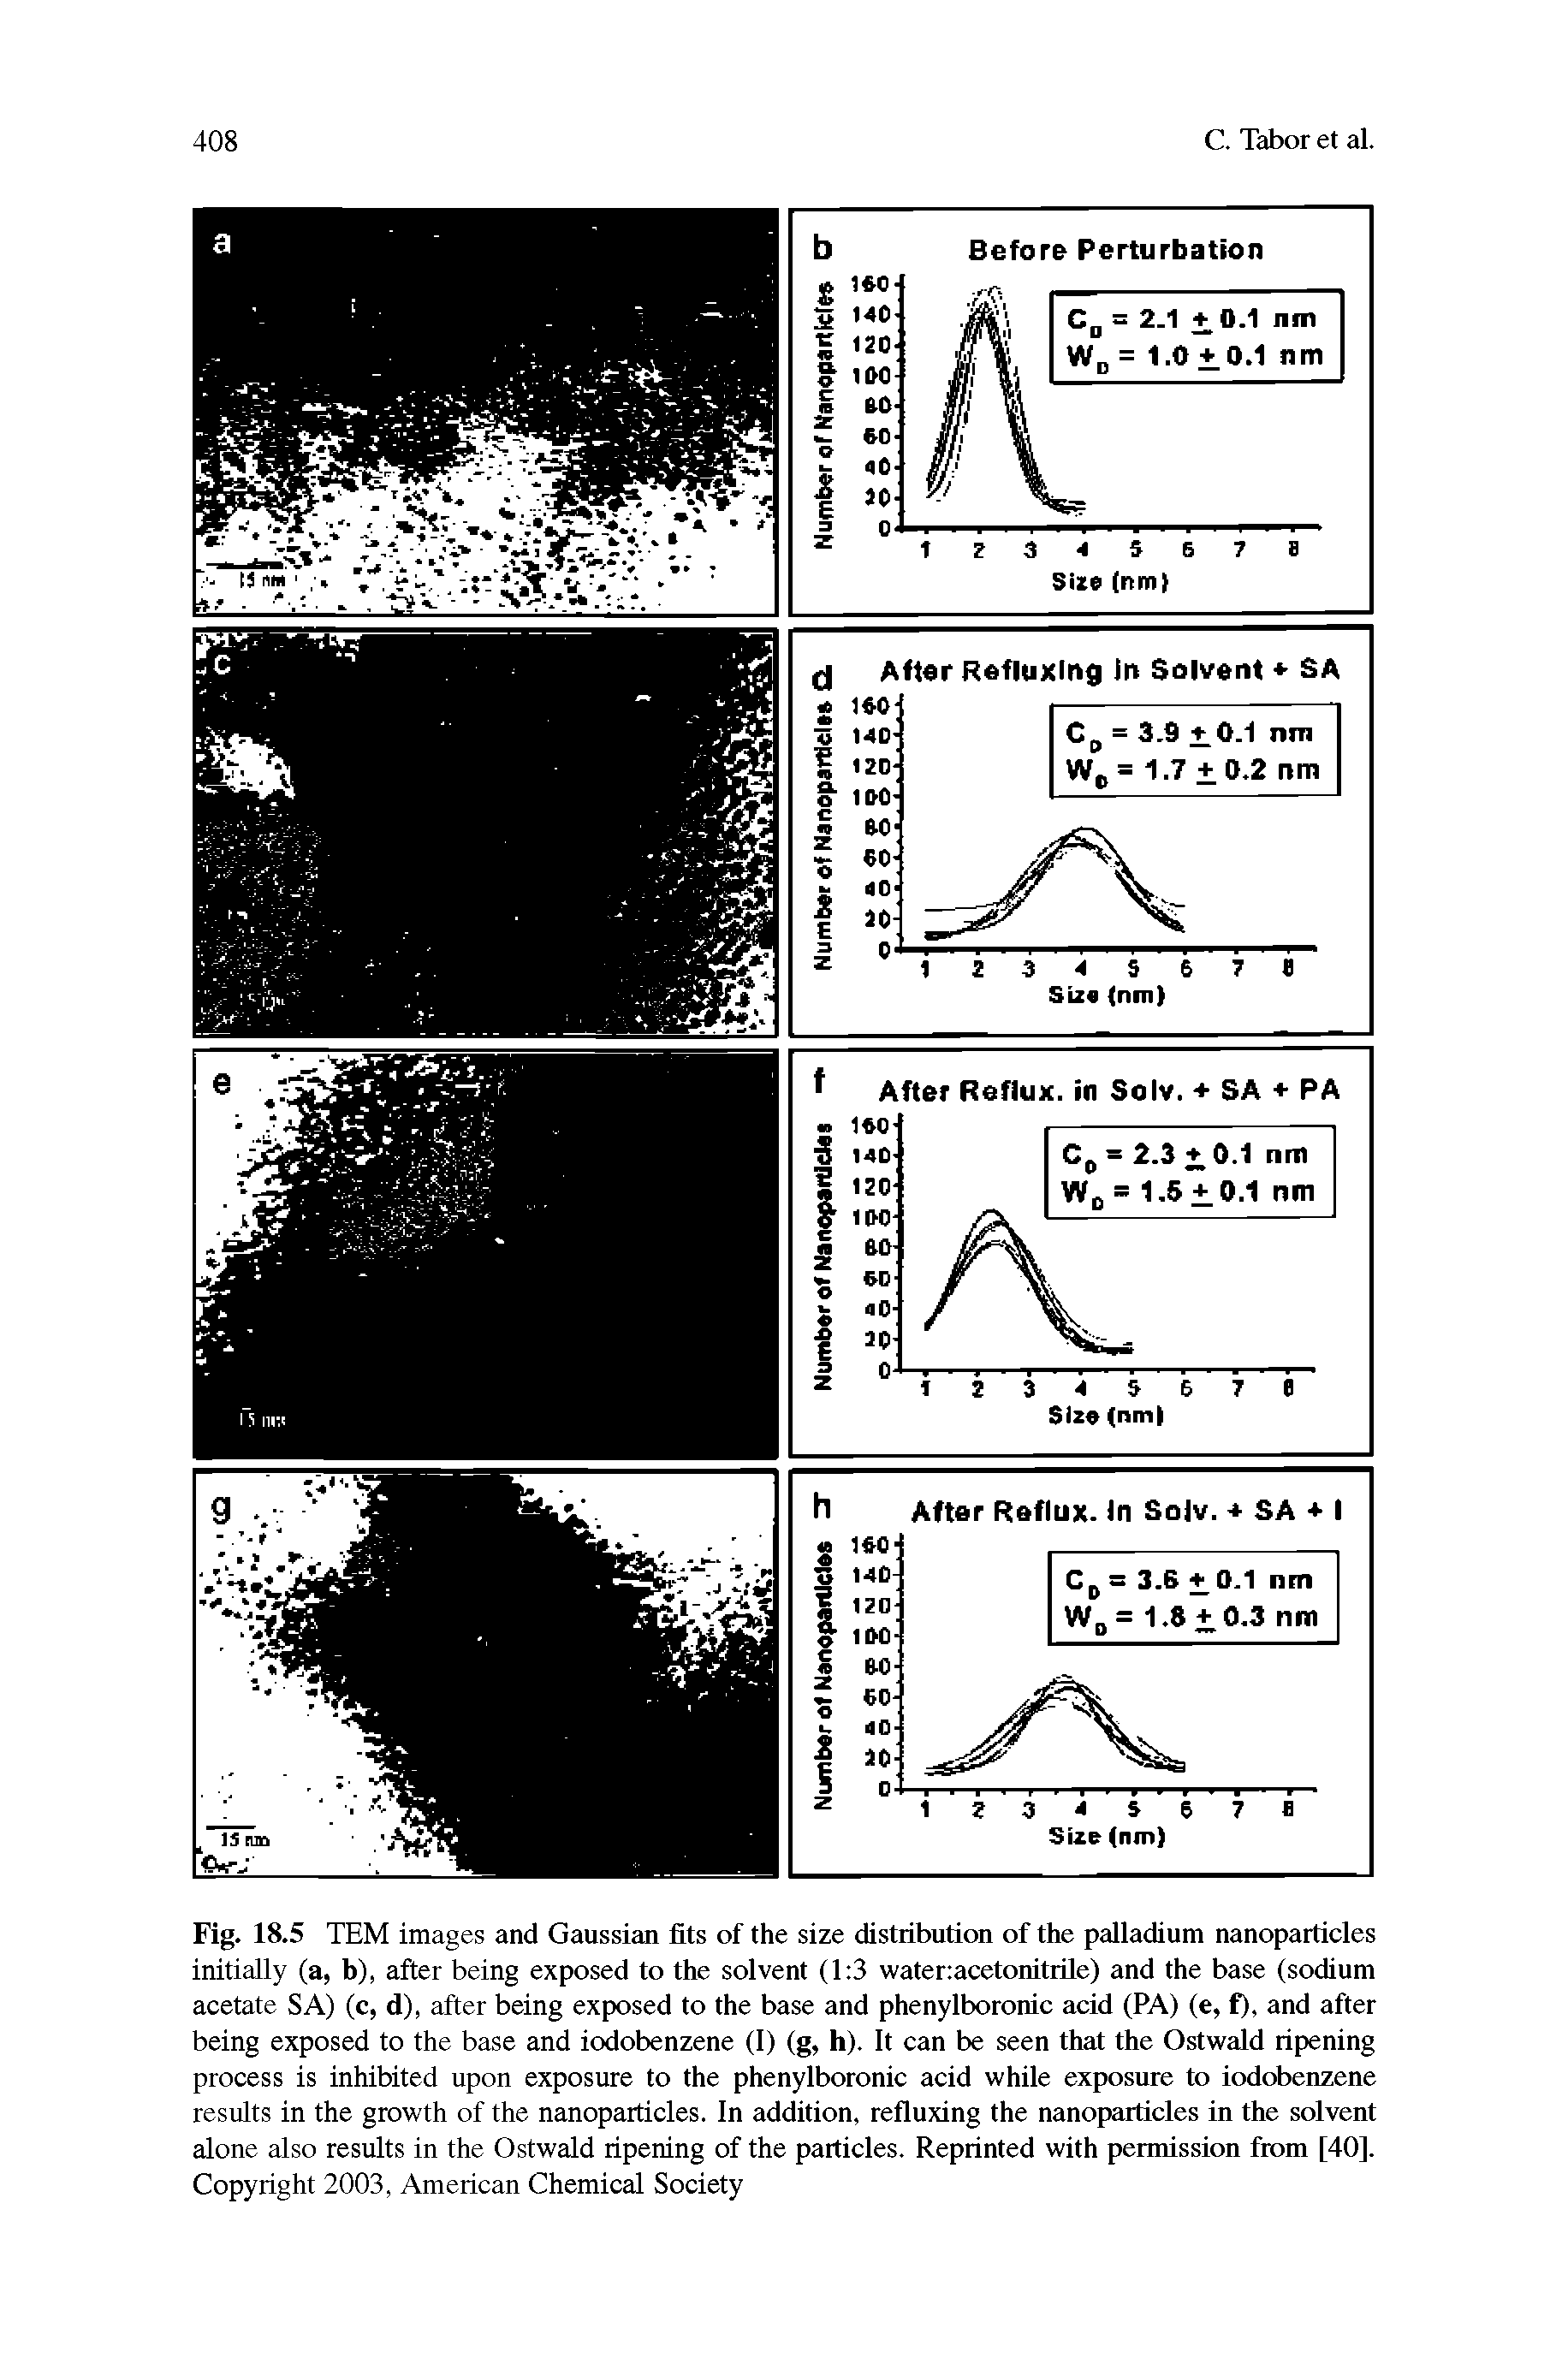 Fig. 18.5 TEM images and Gaussian fits of the size distribution of the palladium nanoparticles initially (a, b), after being exposed to the solvent (1 3 water acetonitrile) and the base (sodium acetate SA) (c, d), after being exposed to the base and phenylboronre acid (PA) (e, f), and after being exposed to the base and iodobenzene (I) (g, h). It can be seen that the Ostwald ripening process is inhibited upon exposure to the phenylboronic acid while exposure to iodobenzene results in the growth of the nanoparticles. In addition, refluxing the nanoparticles in the solvent alone also results in the Ostwald ripening of the particles. Reprinted with permission from [40]. Copyright 2003, American Chemical Society...